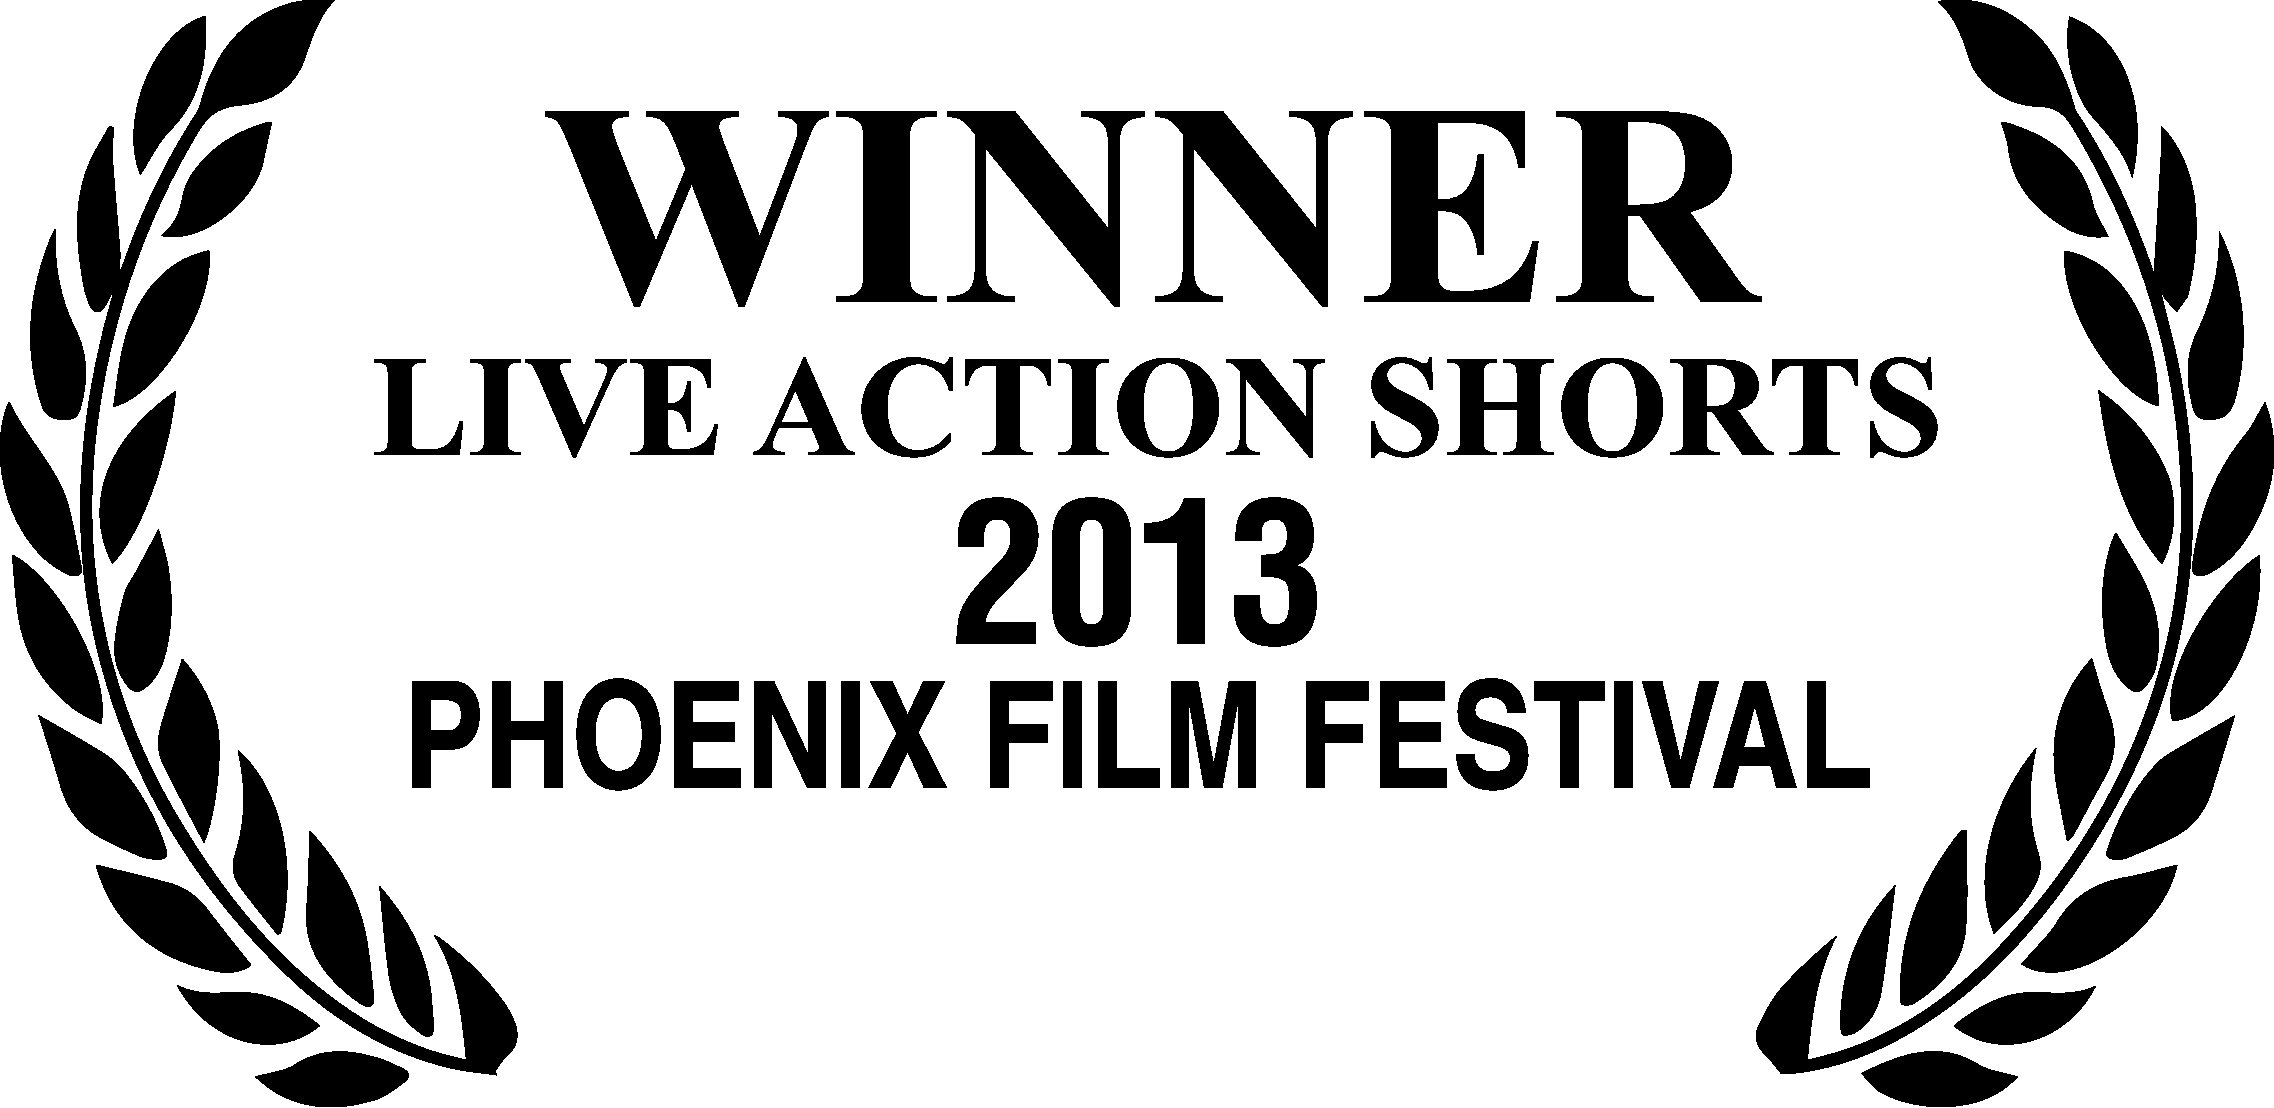 6 Years, 4 Months & 23 Days wins the Copper Wing, Phoenix Film Festival, 2013